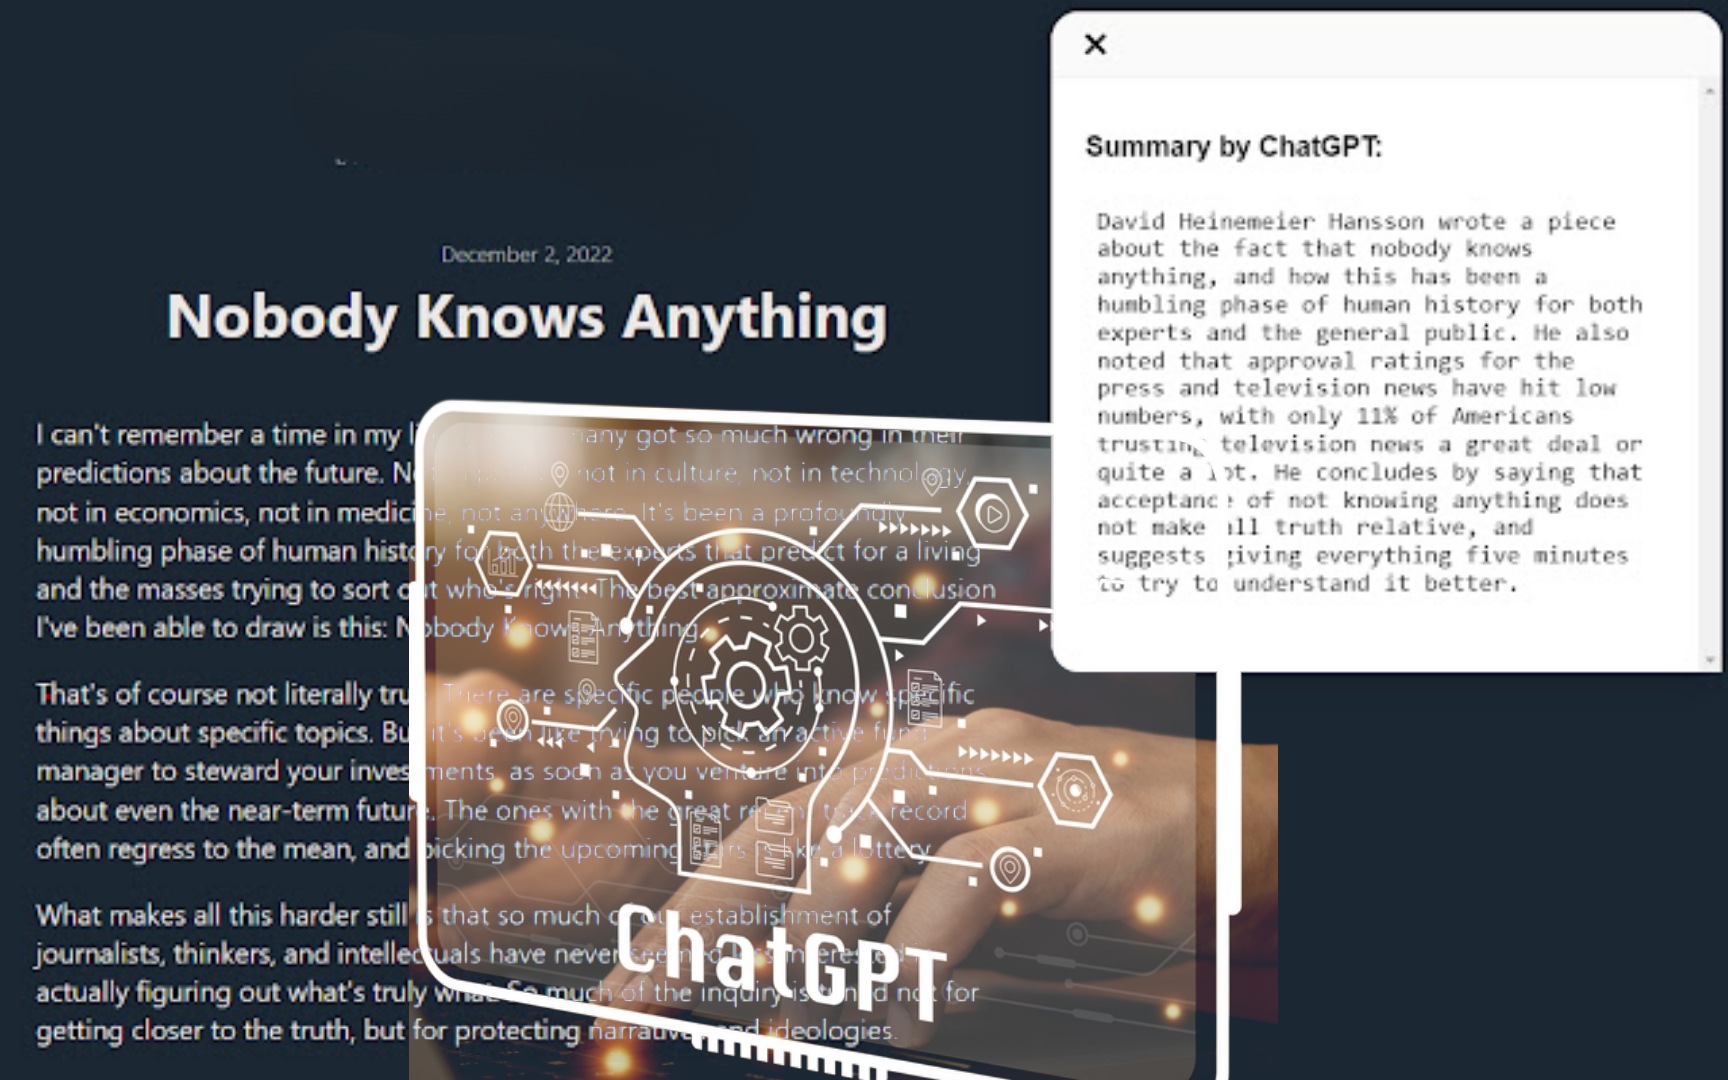 How to use ChatGPT to summarize a long article or book